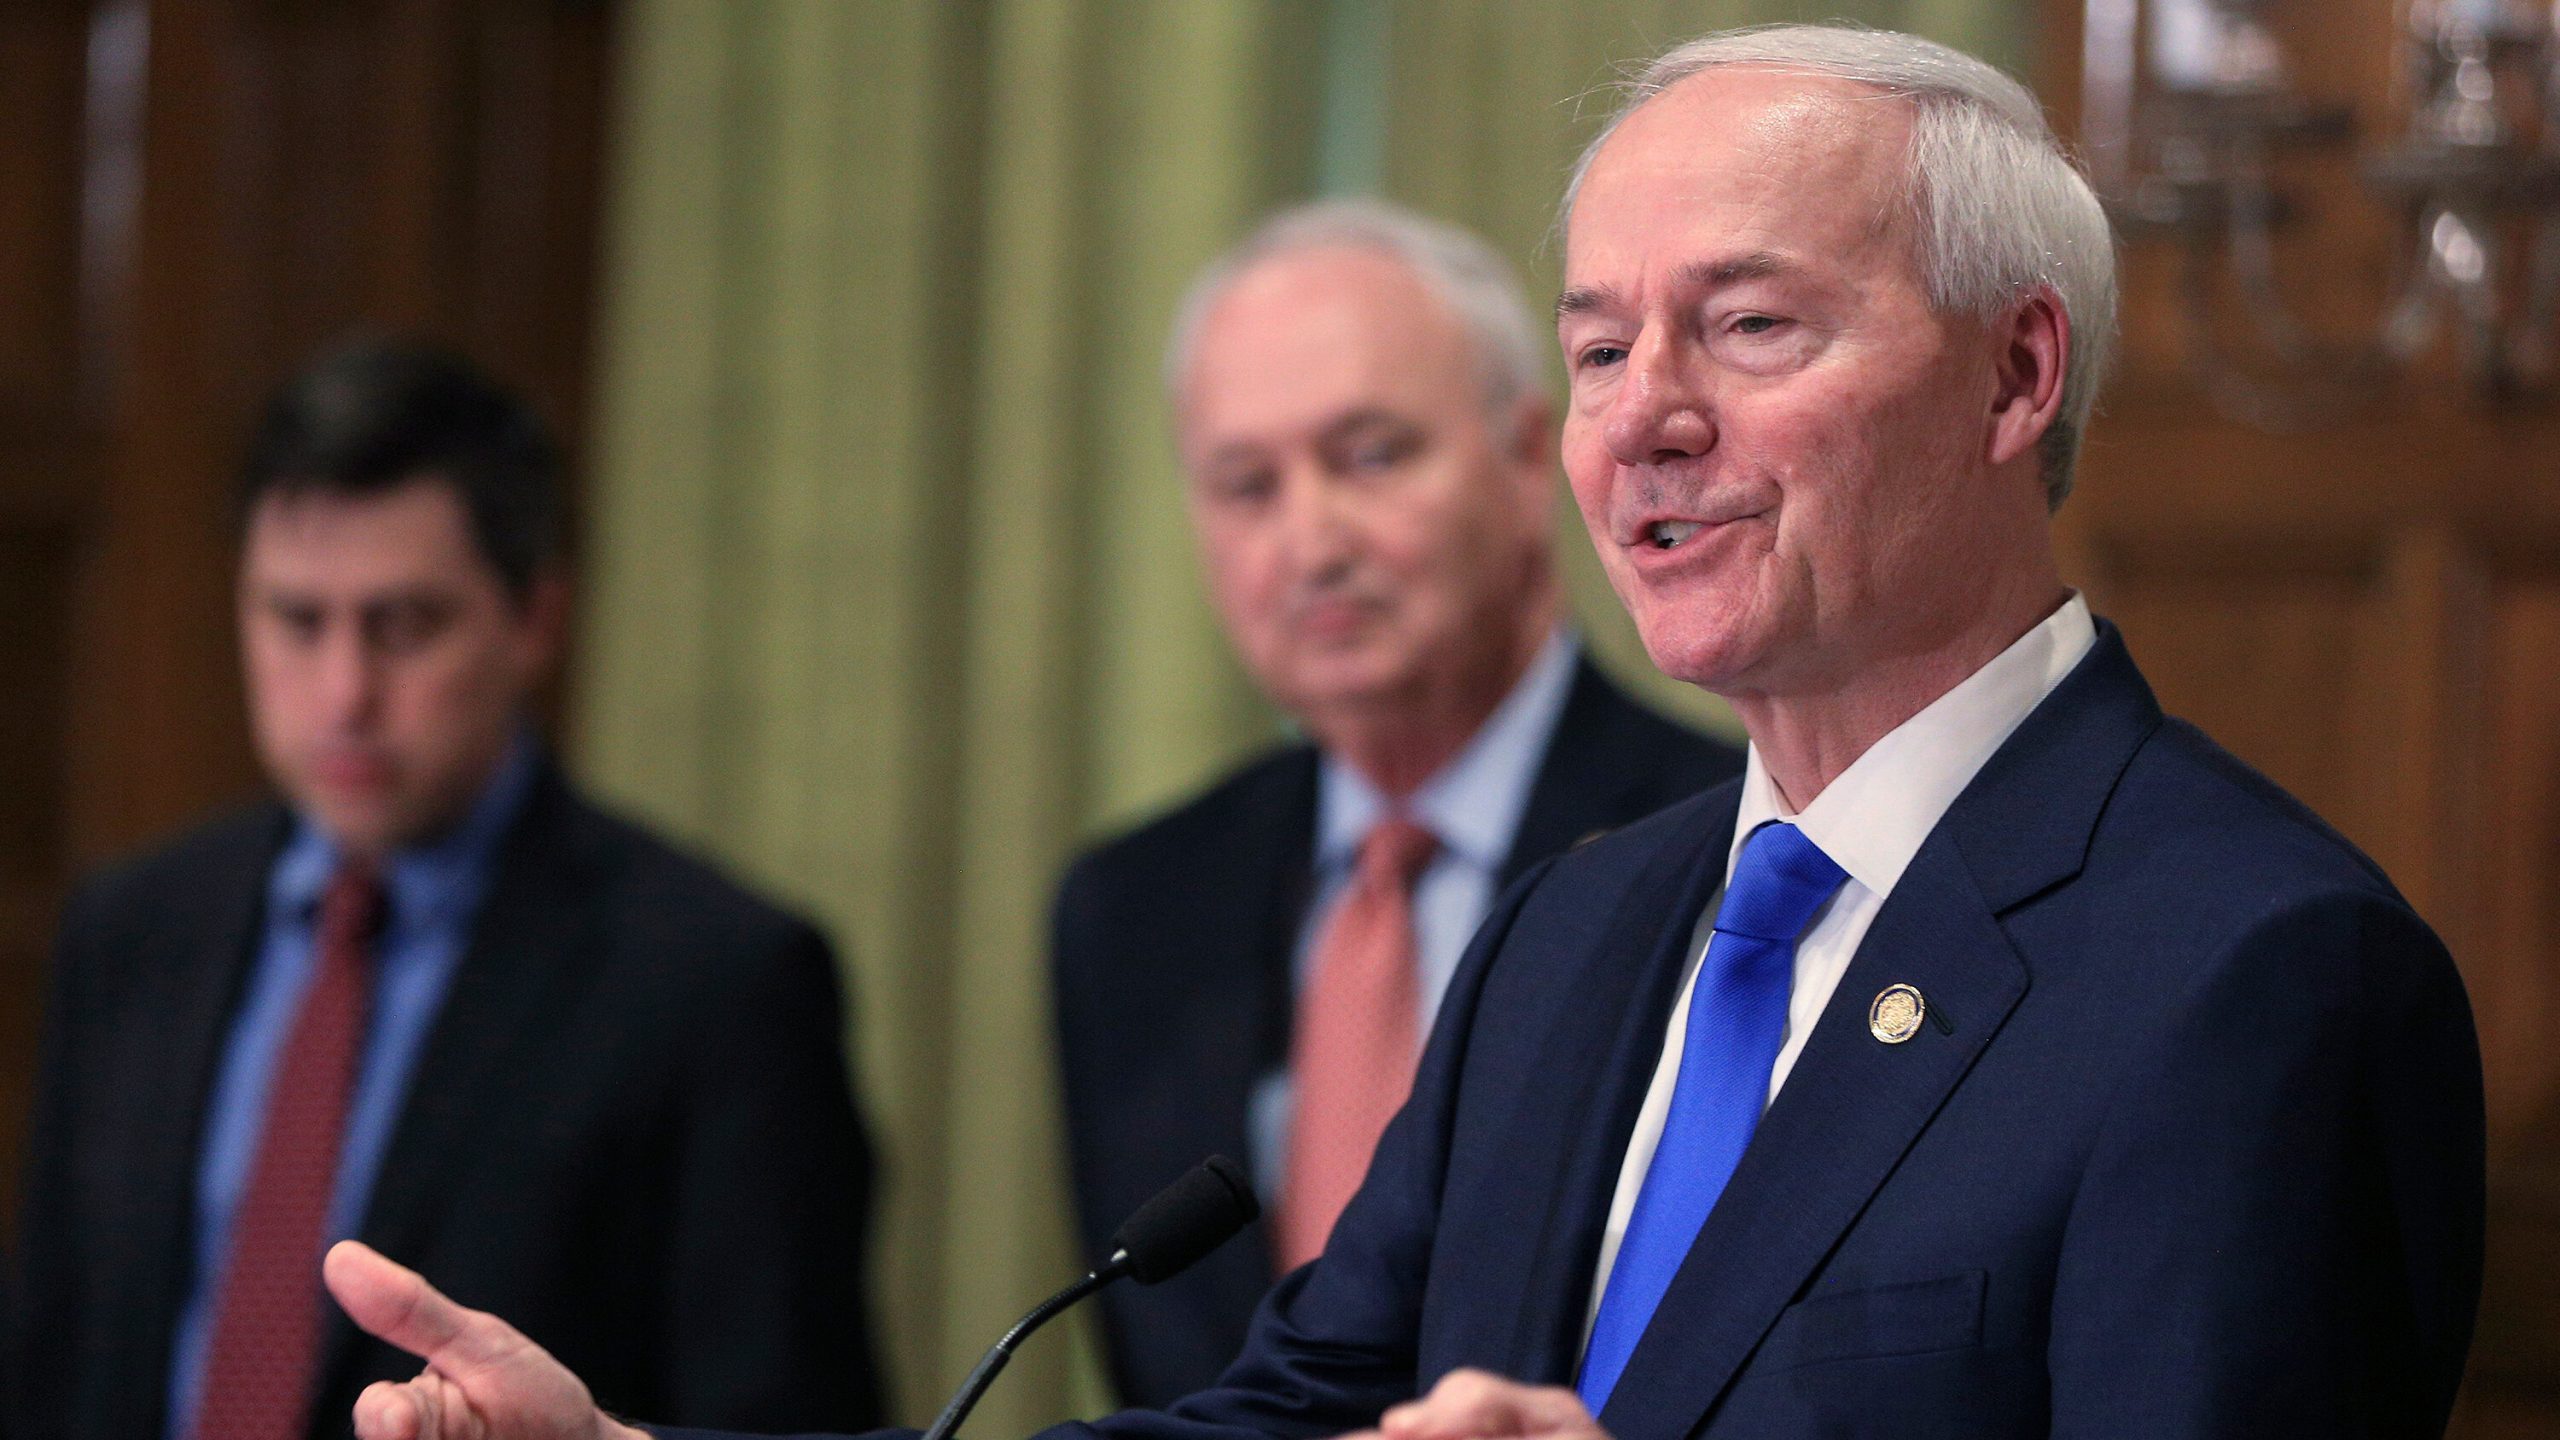 Arkansas Republican Gov. Asa Hutchinson Wants to Be a Presidential Candidate in 2024